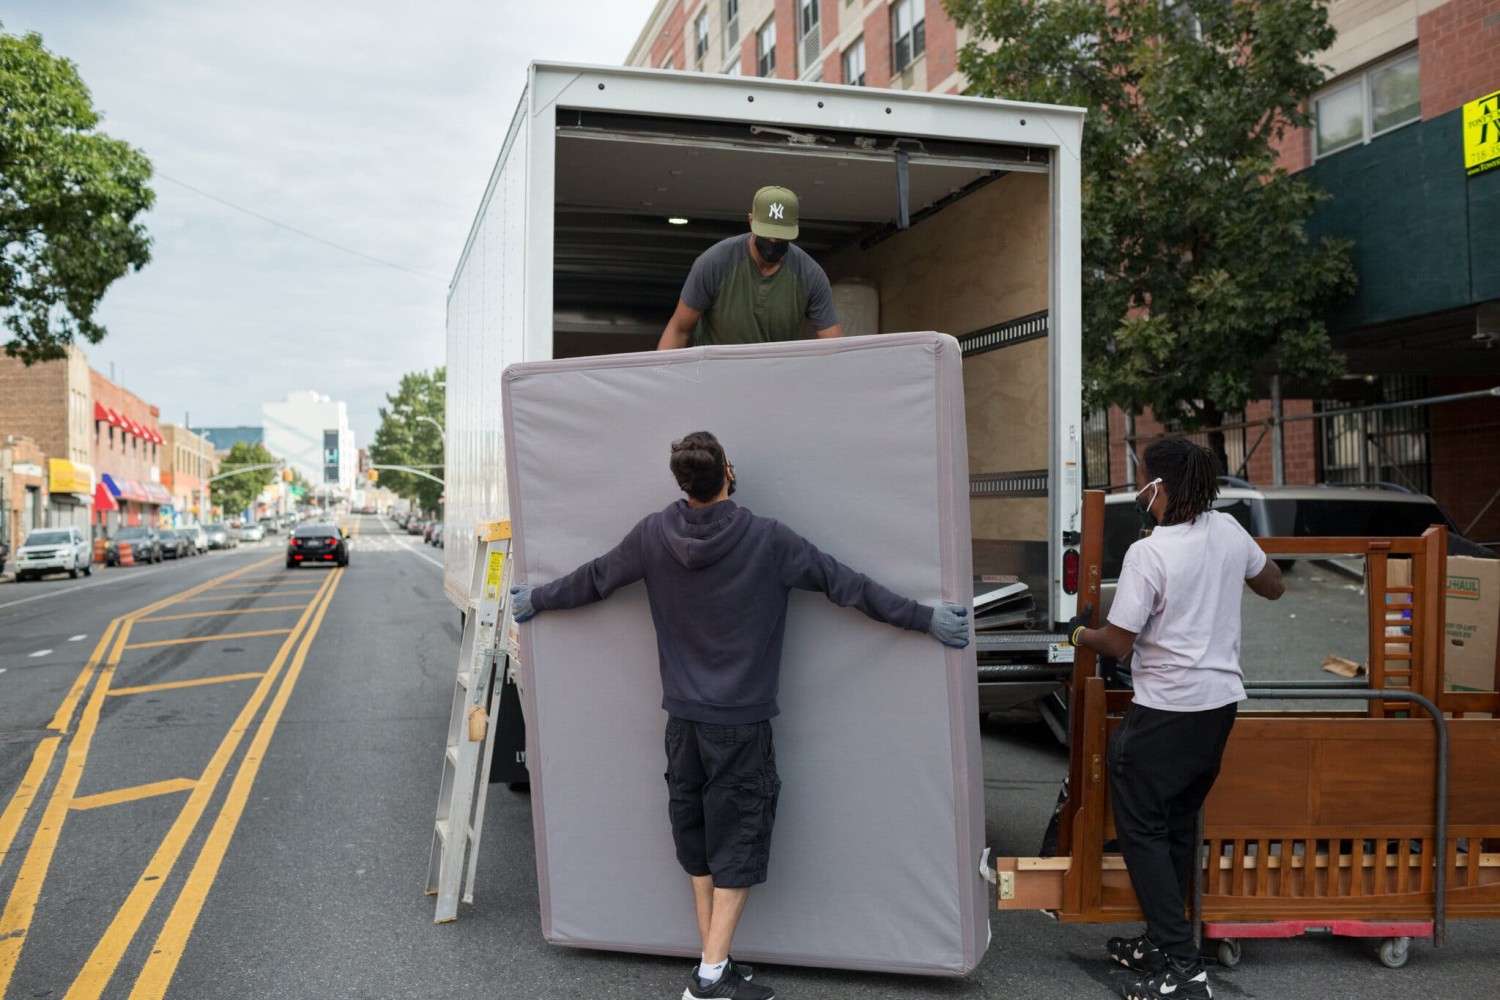 Movers See All, and They Have Thoughts on Your Relationship